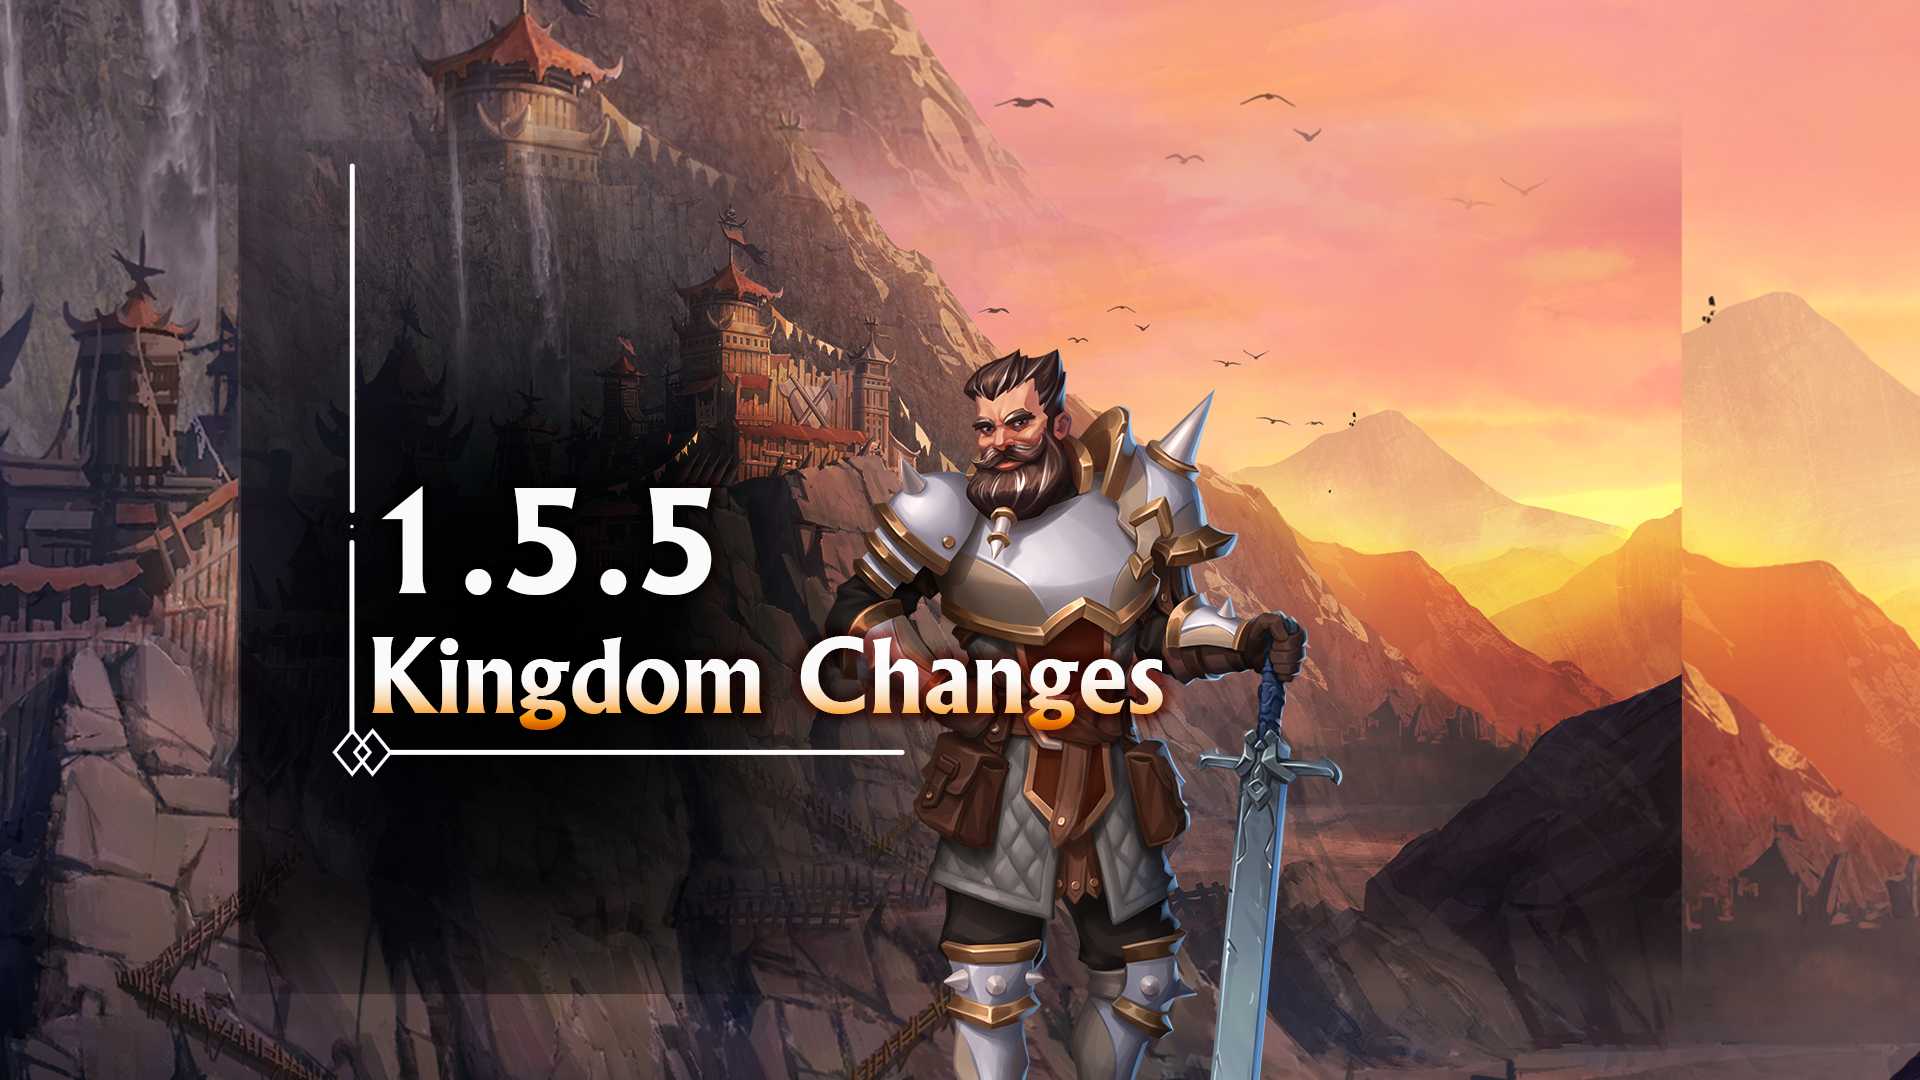 Upcoming Kingdoms Changes in Update 1.5.5